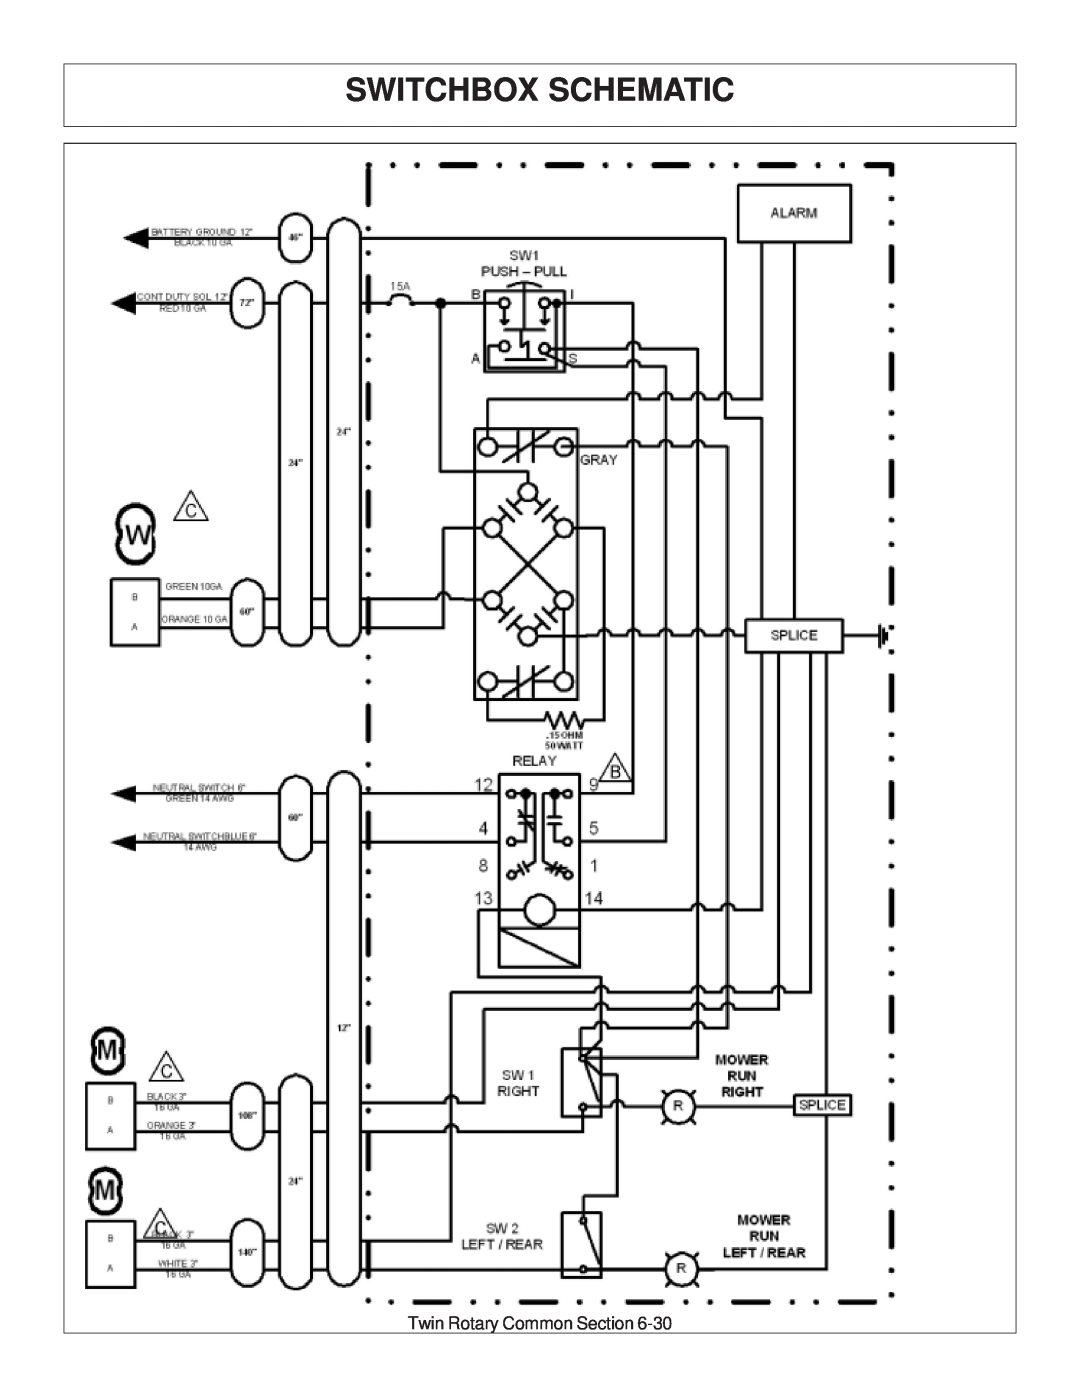 Tiger Products Co., Ltd JD 72-7520 manual Switchbox Schematic, Twin Rotary Common Section 